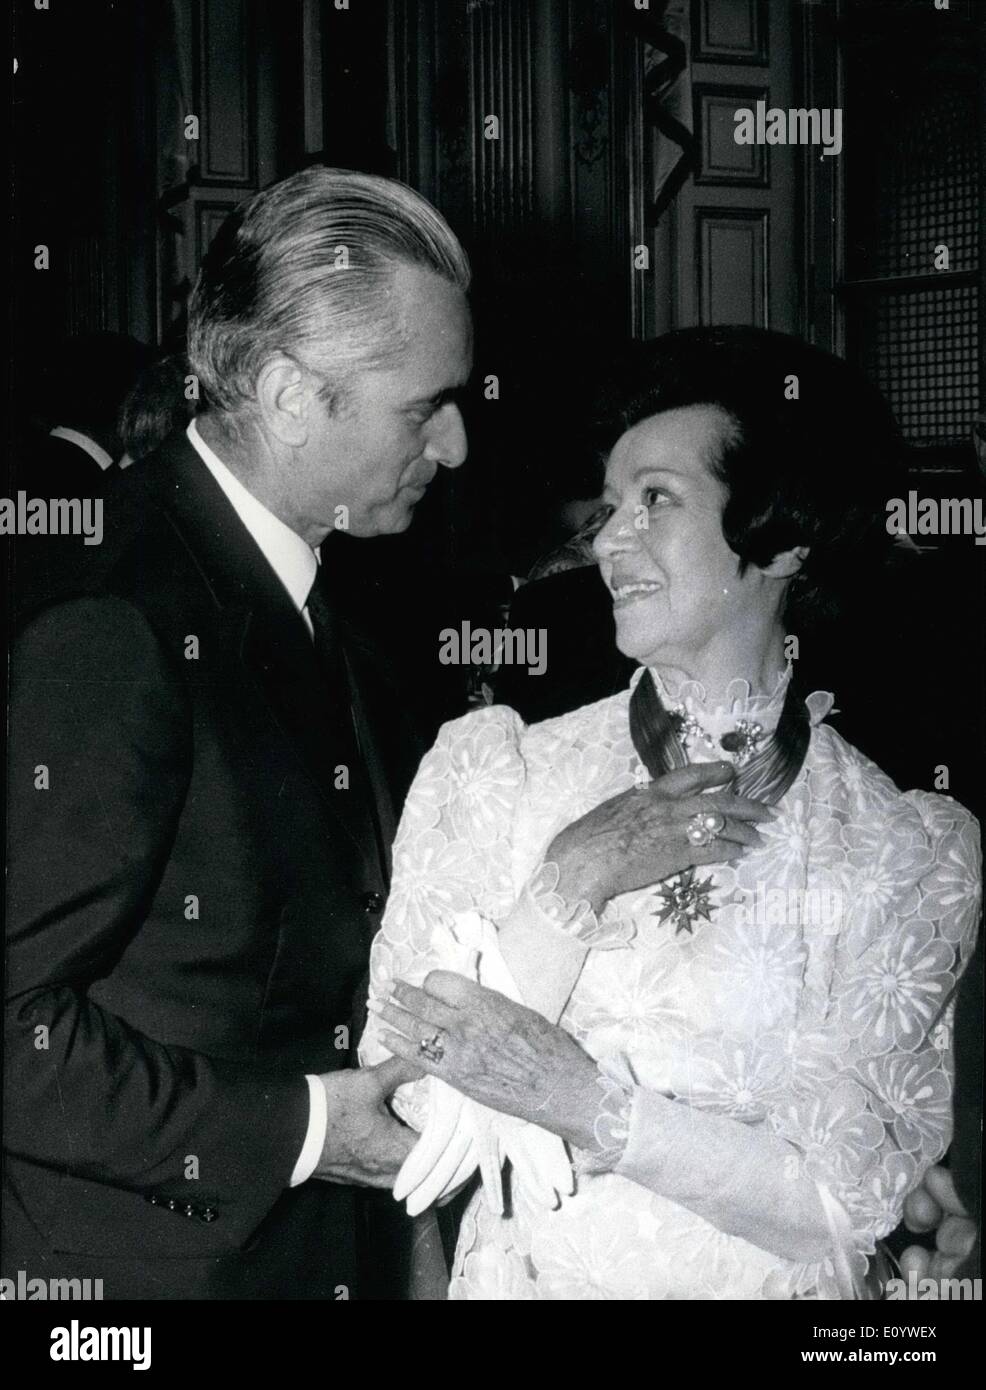 Jul. 20, 1971 - Opera singer Lily Pons received the National Order of Merit Cross yesterday during a reception held at the Matignon Hotel. Jacques Chaban-Delmas presented the award. He is seen here congratulating her after the presentation. Stock Photo